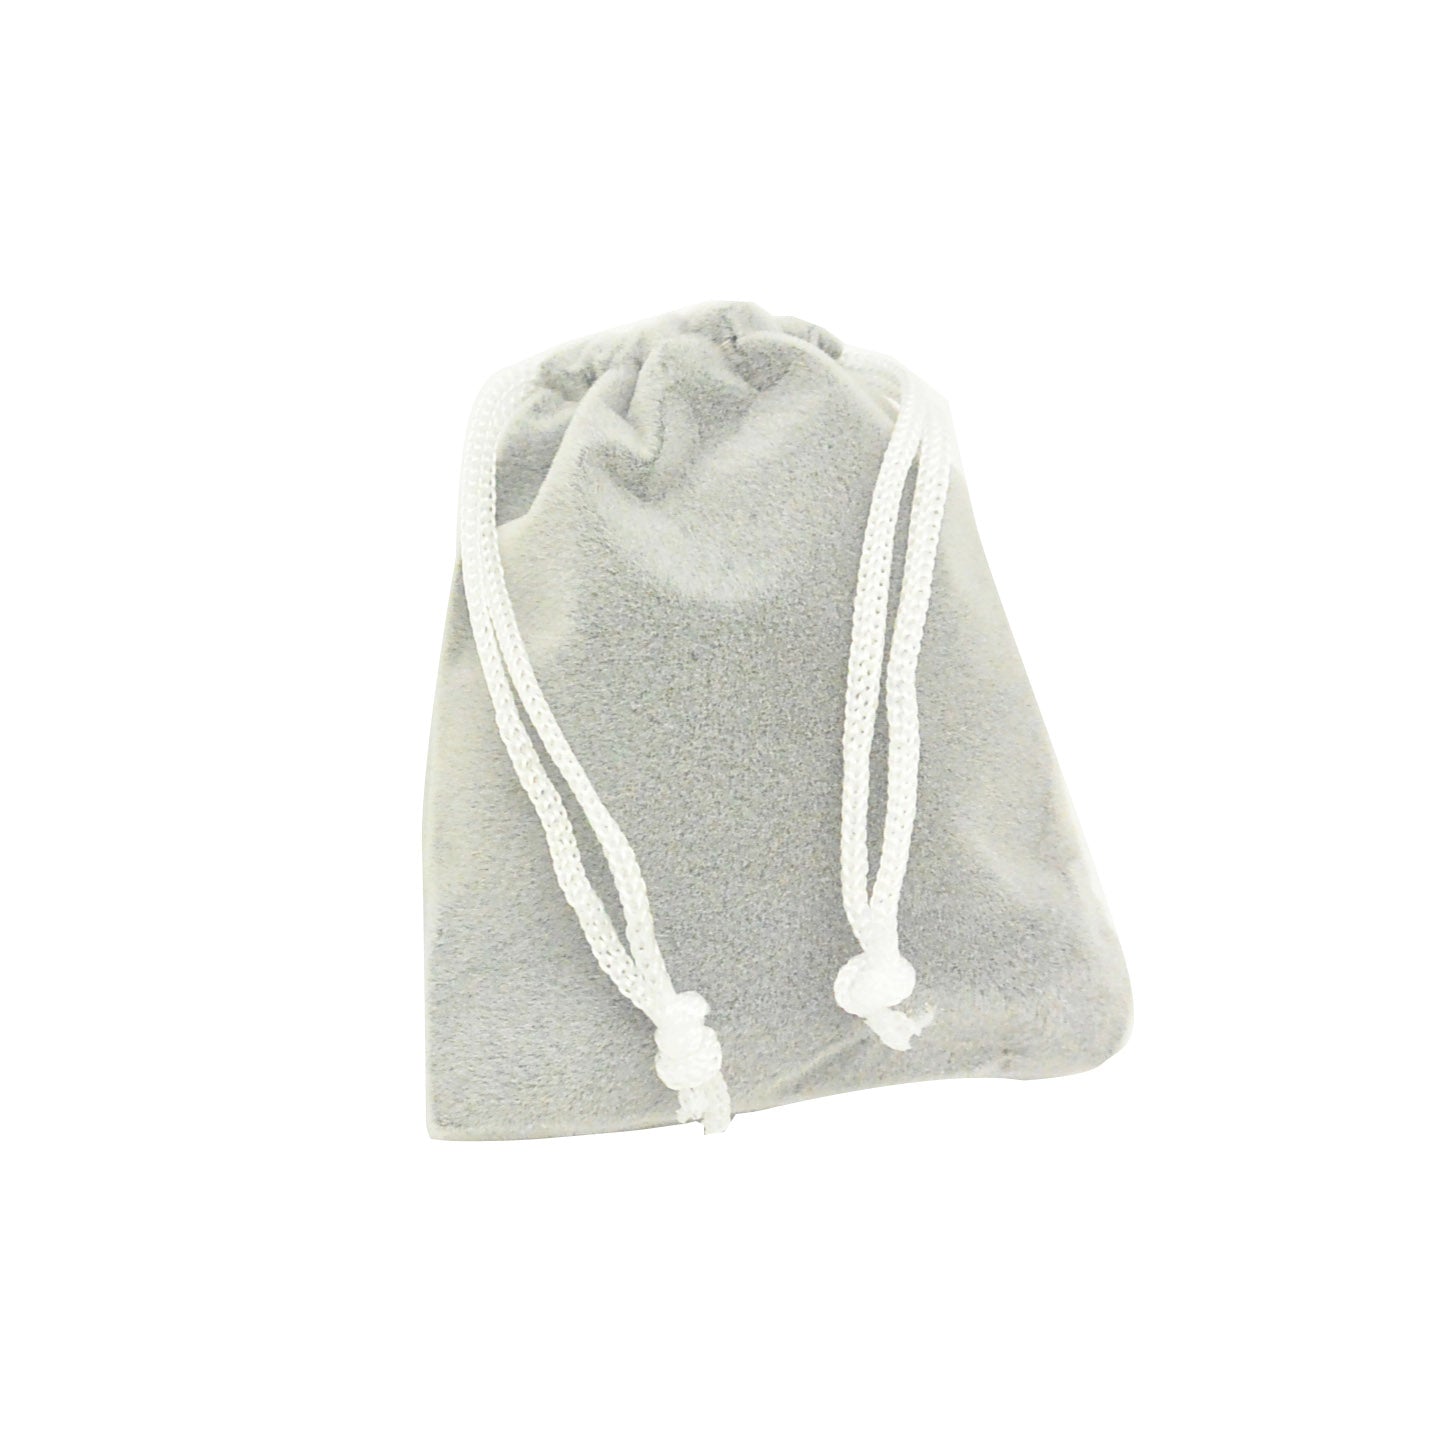 Small Gray High Quality Velvet Pouch Bags Party Favors